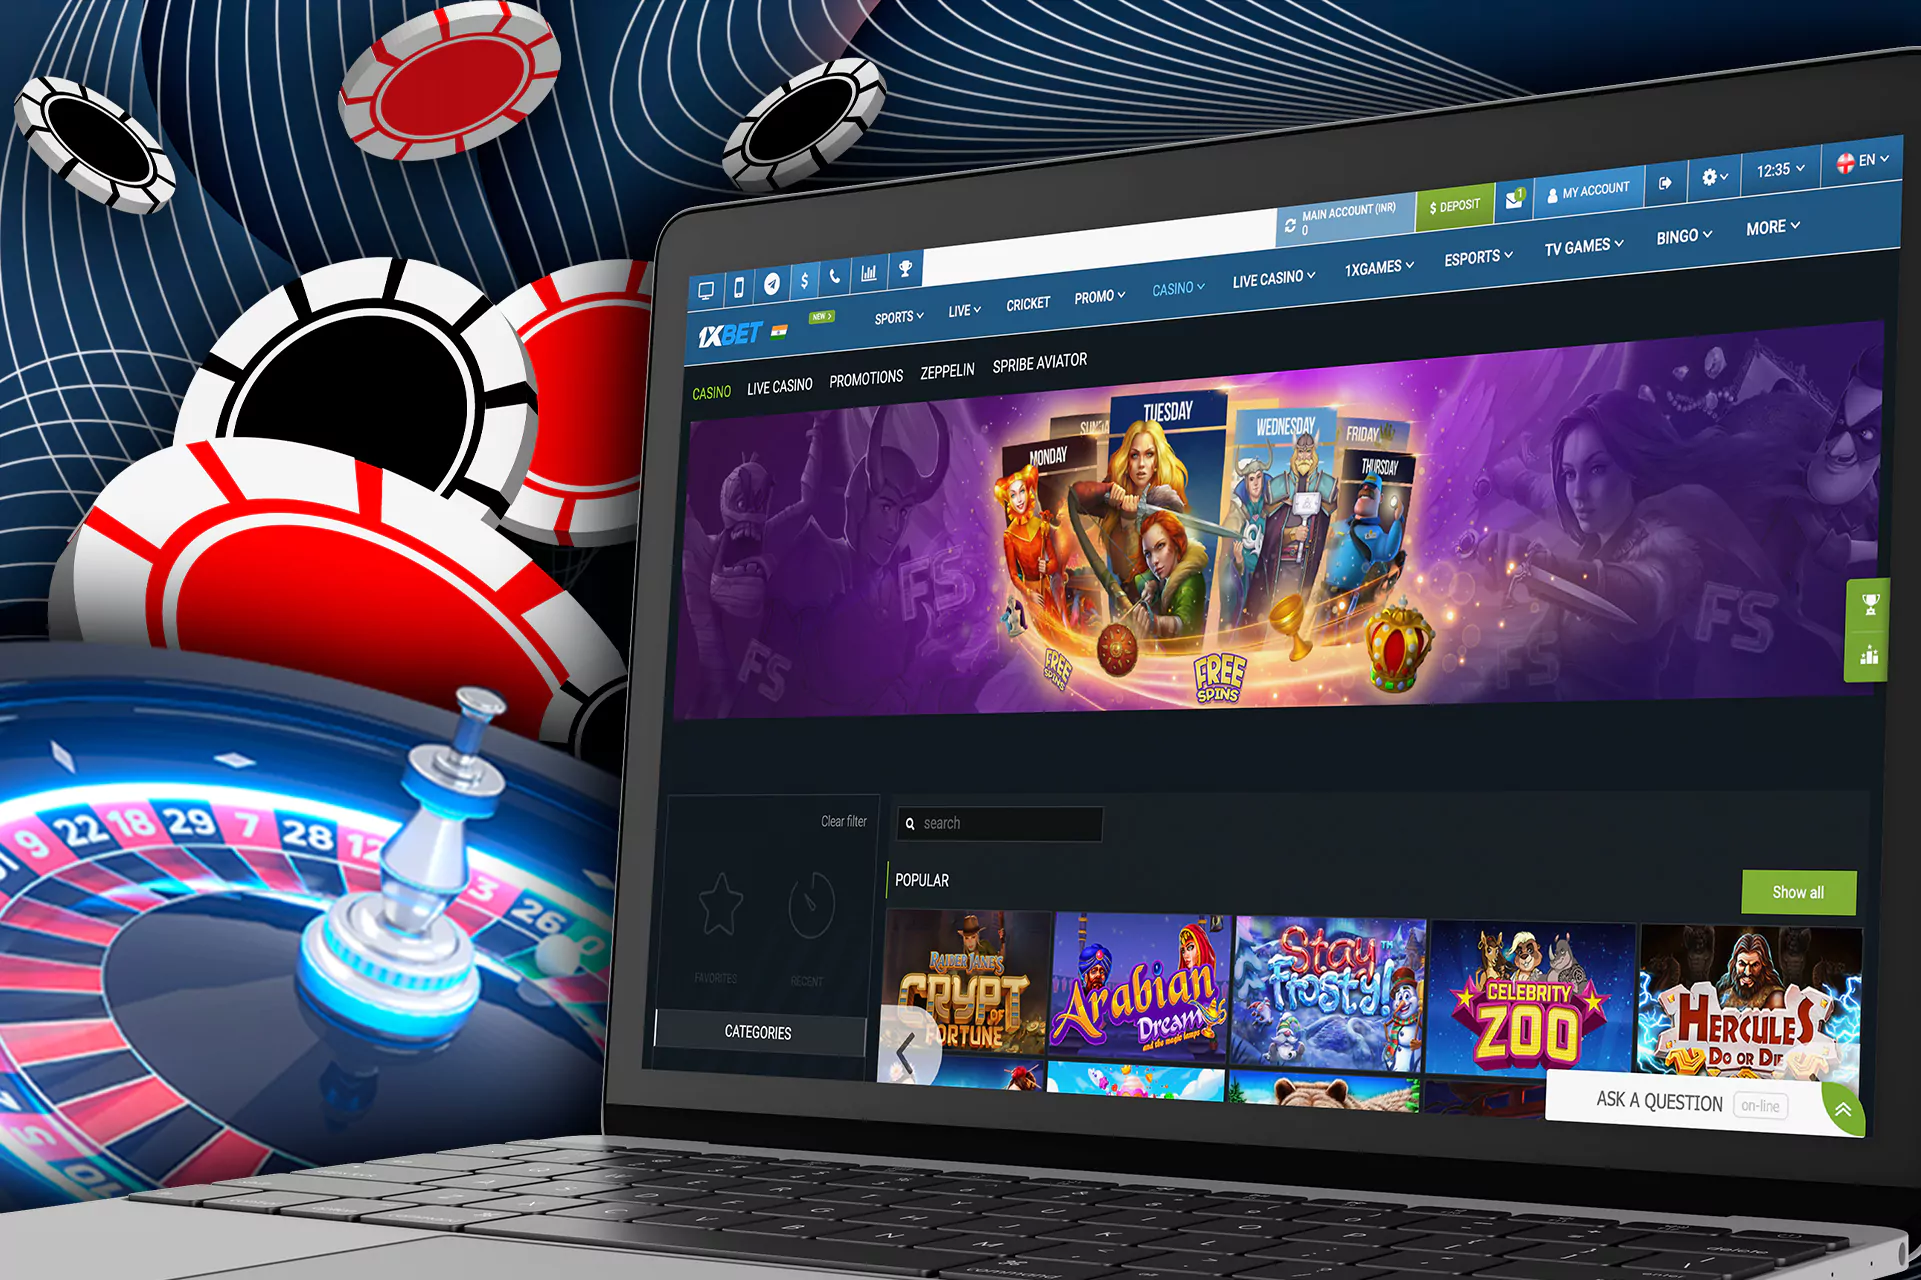 Play your favorite games in the 1xBet online casino section.